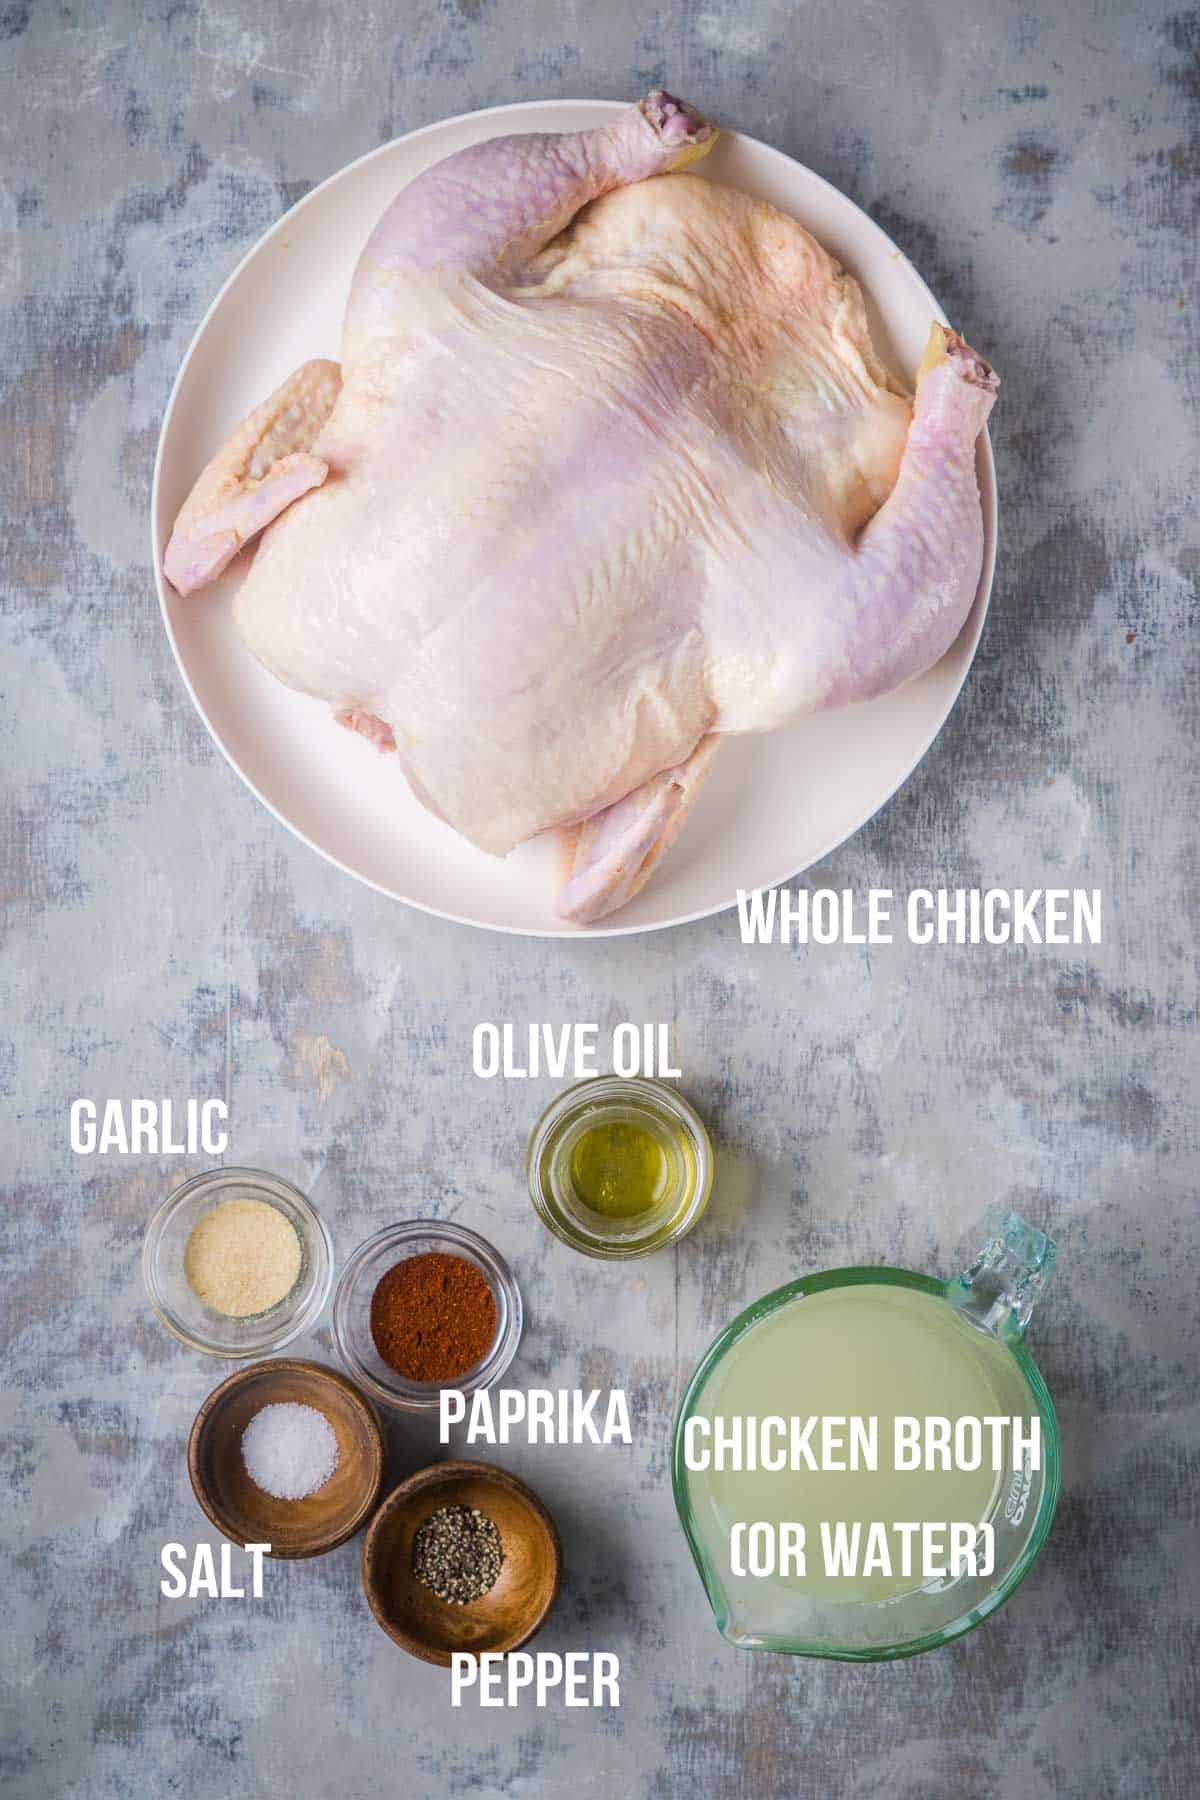 Instant Pot whole chicken ingredients measured and ready to use